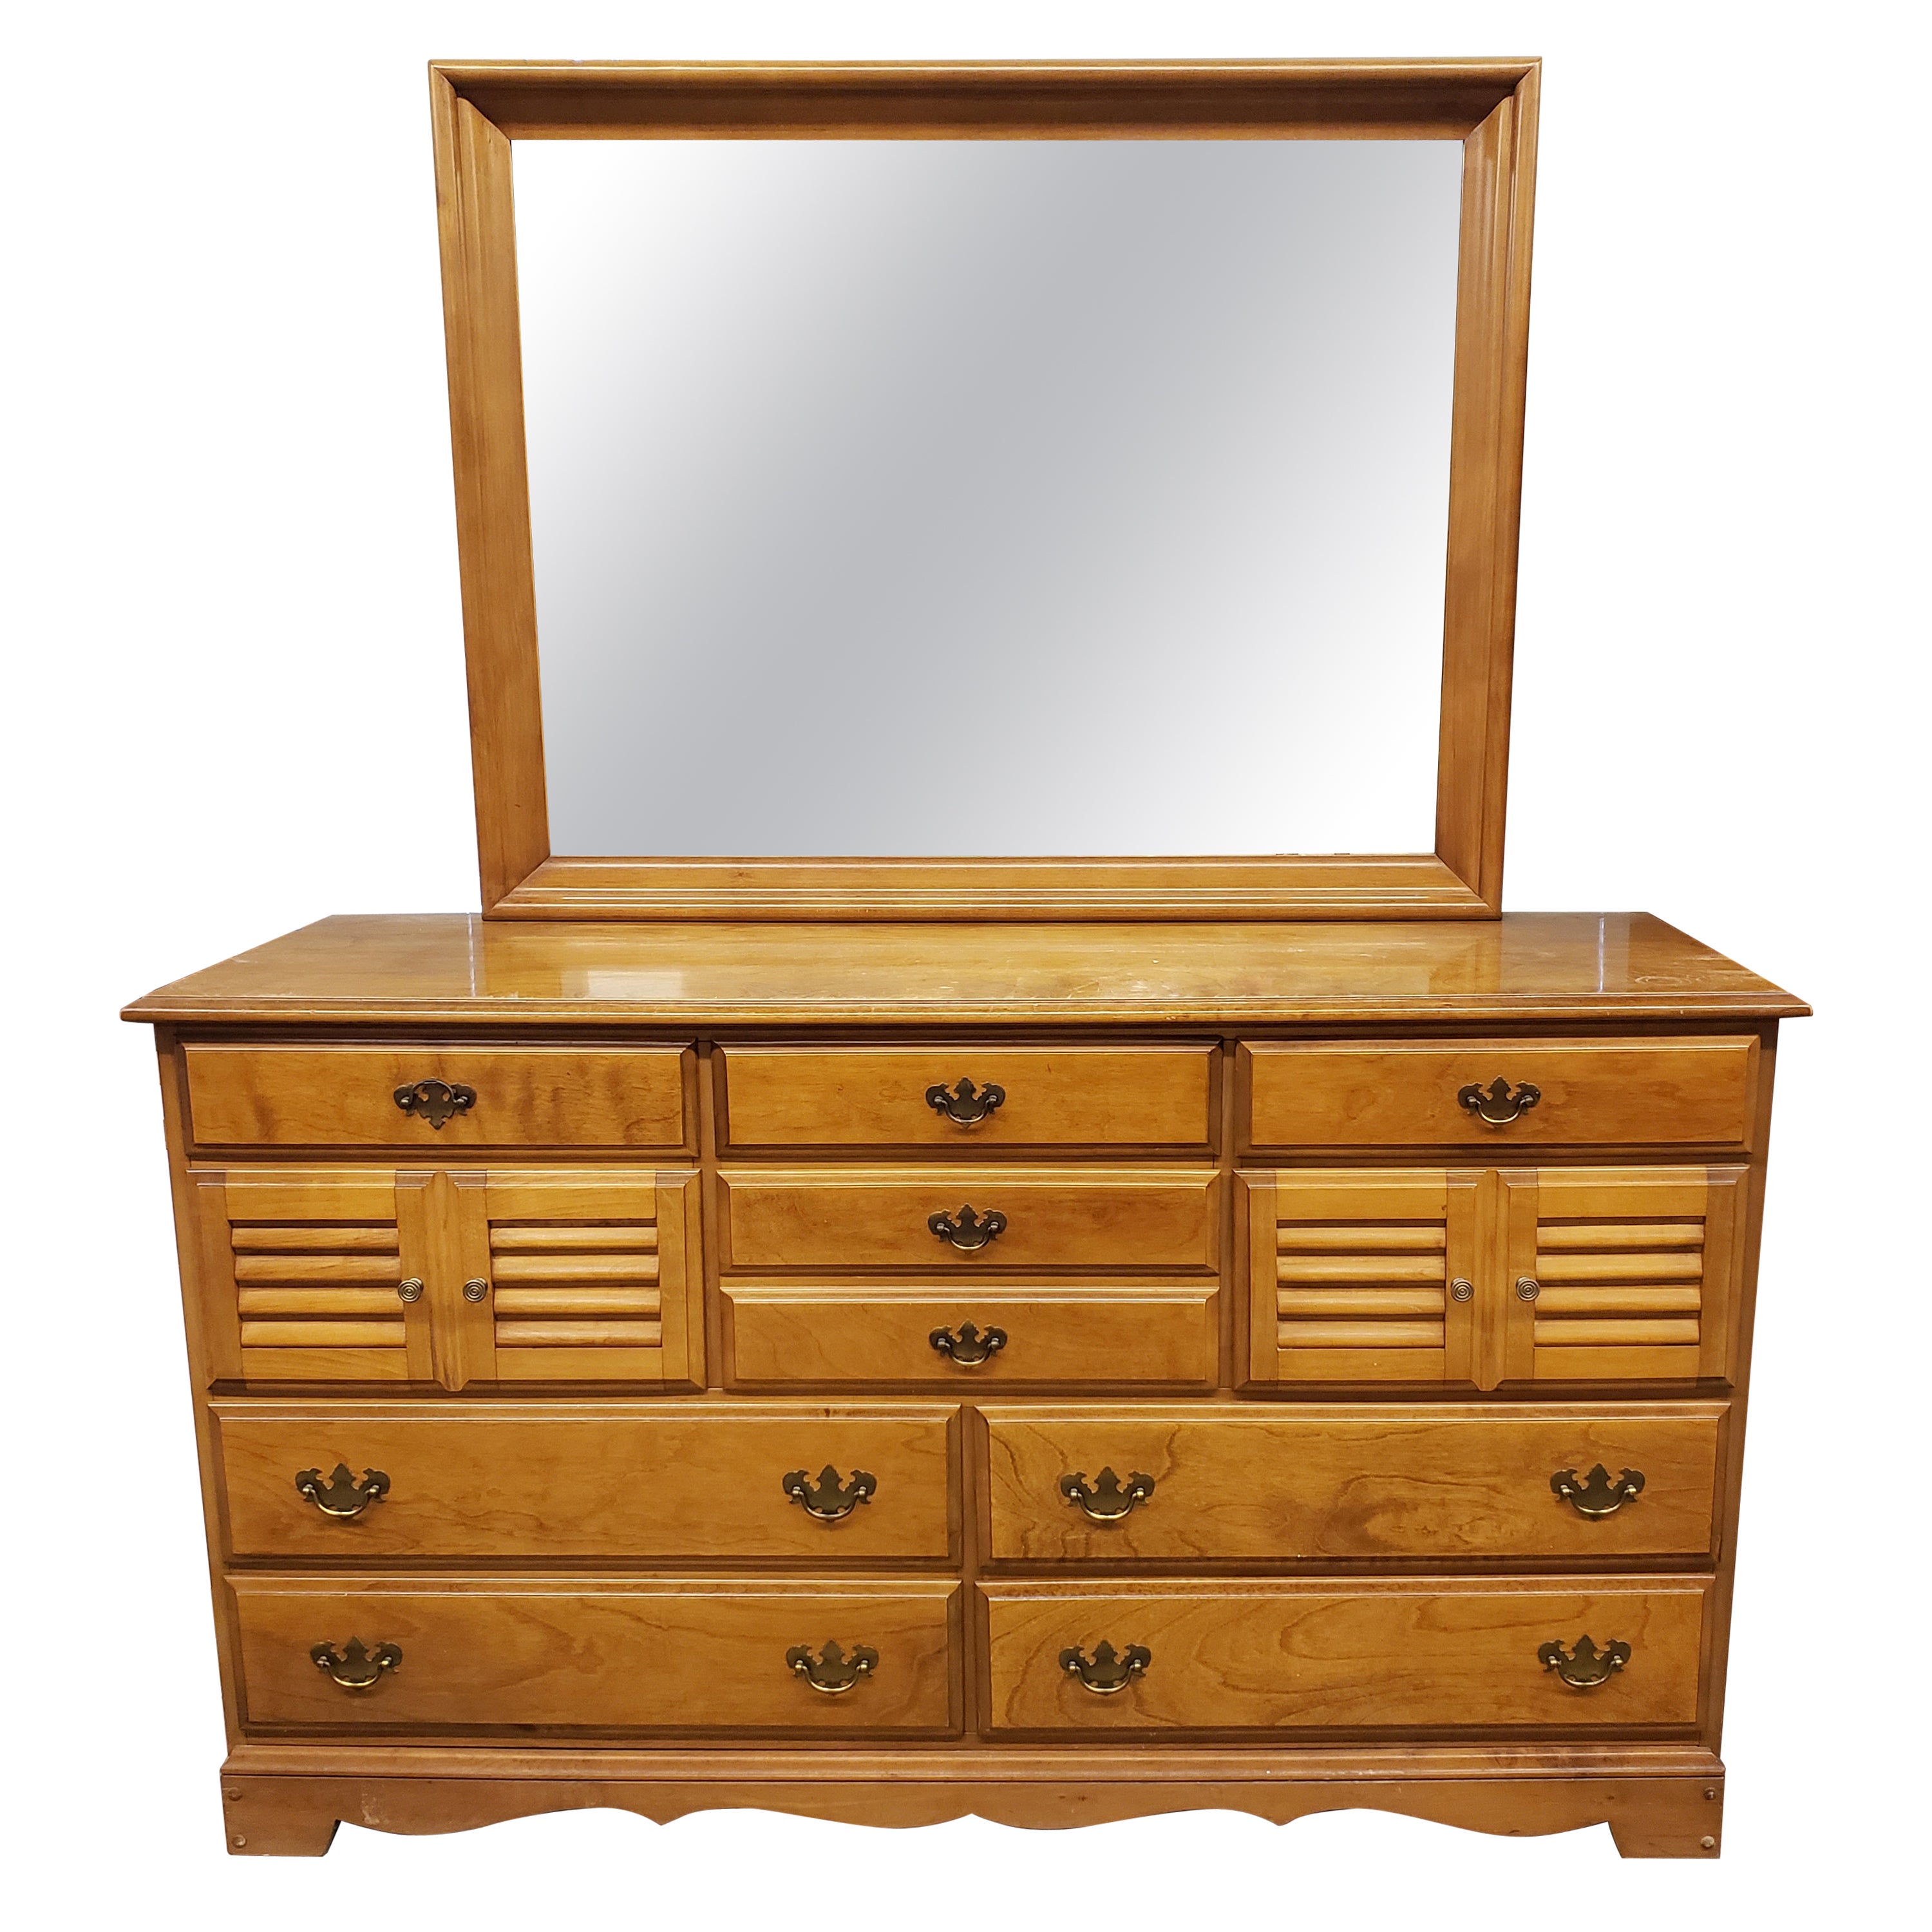 B. P. John Maple Double Dresser with Mirror For Sale